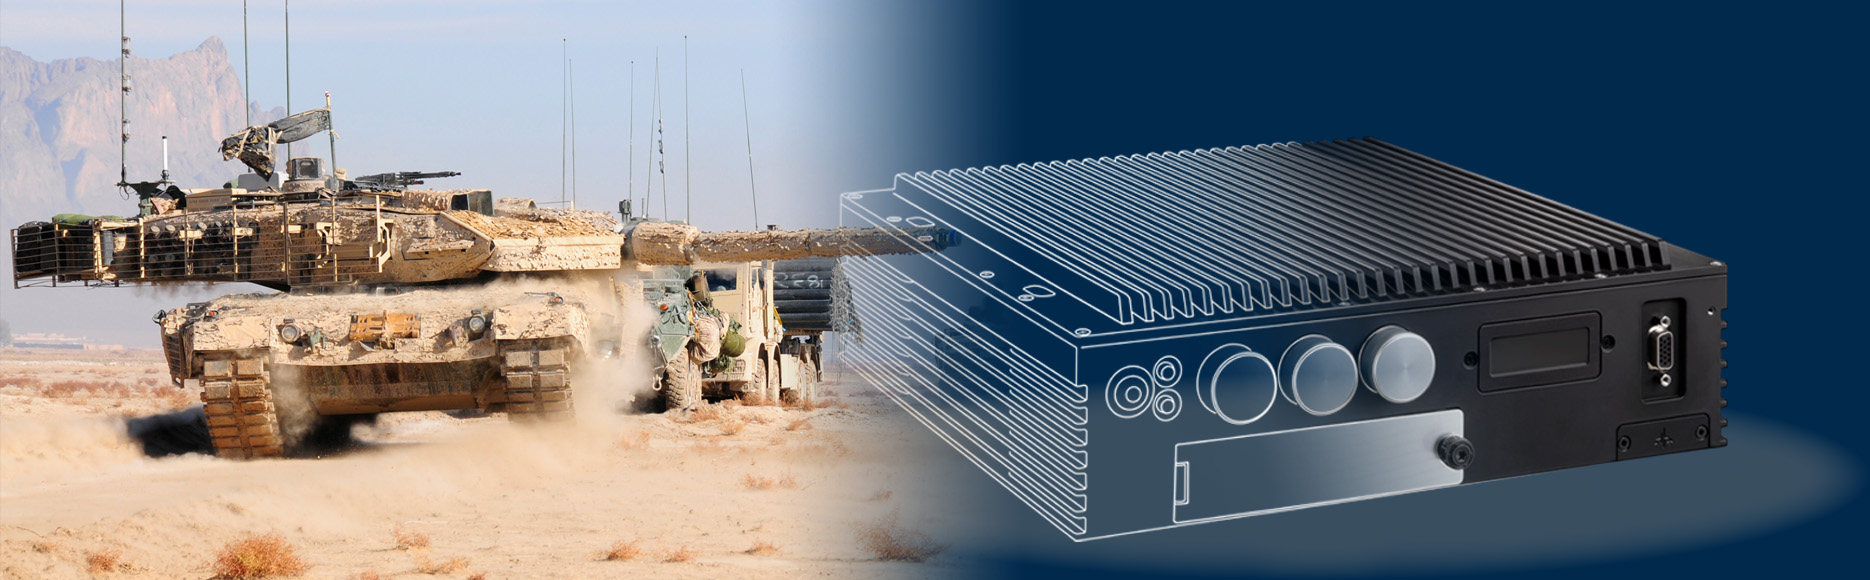 LEOPARD 2A4 during a mission in the desert and key visual of the vehicle server